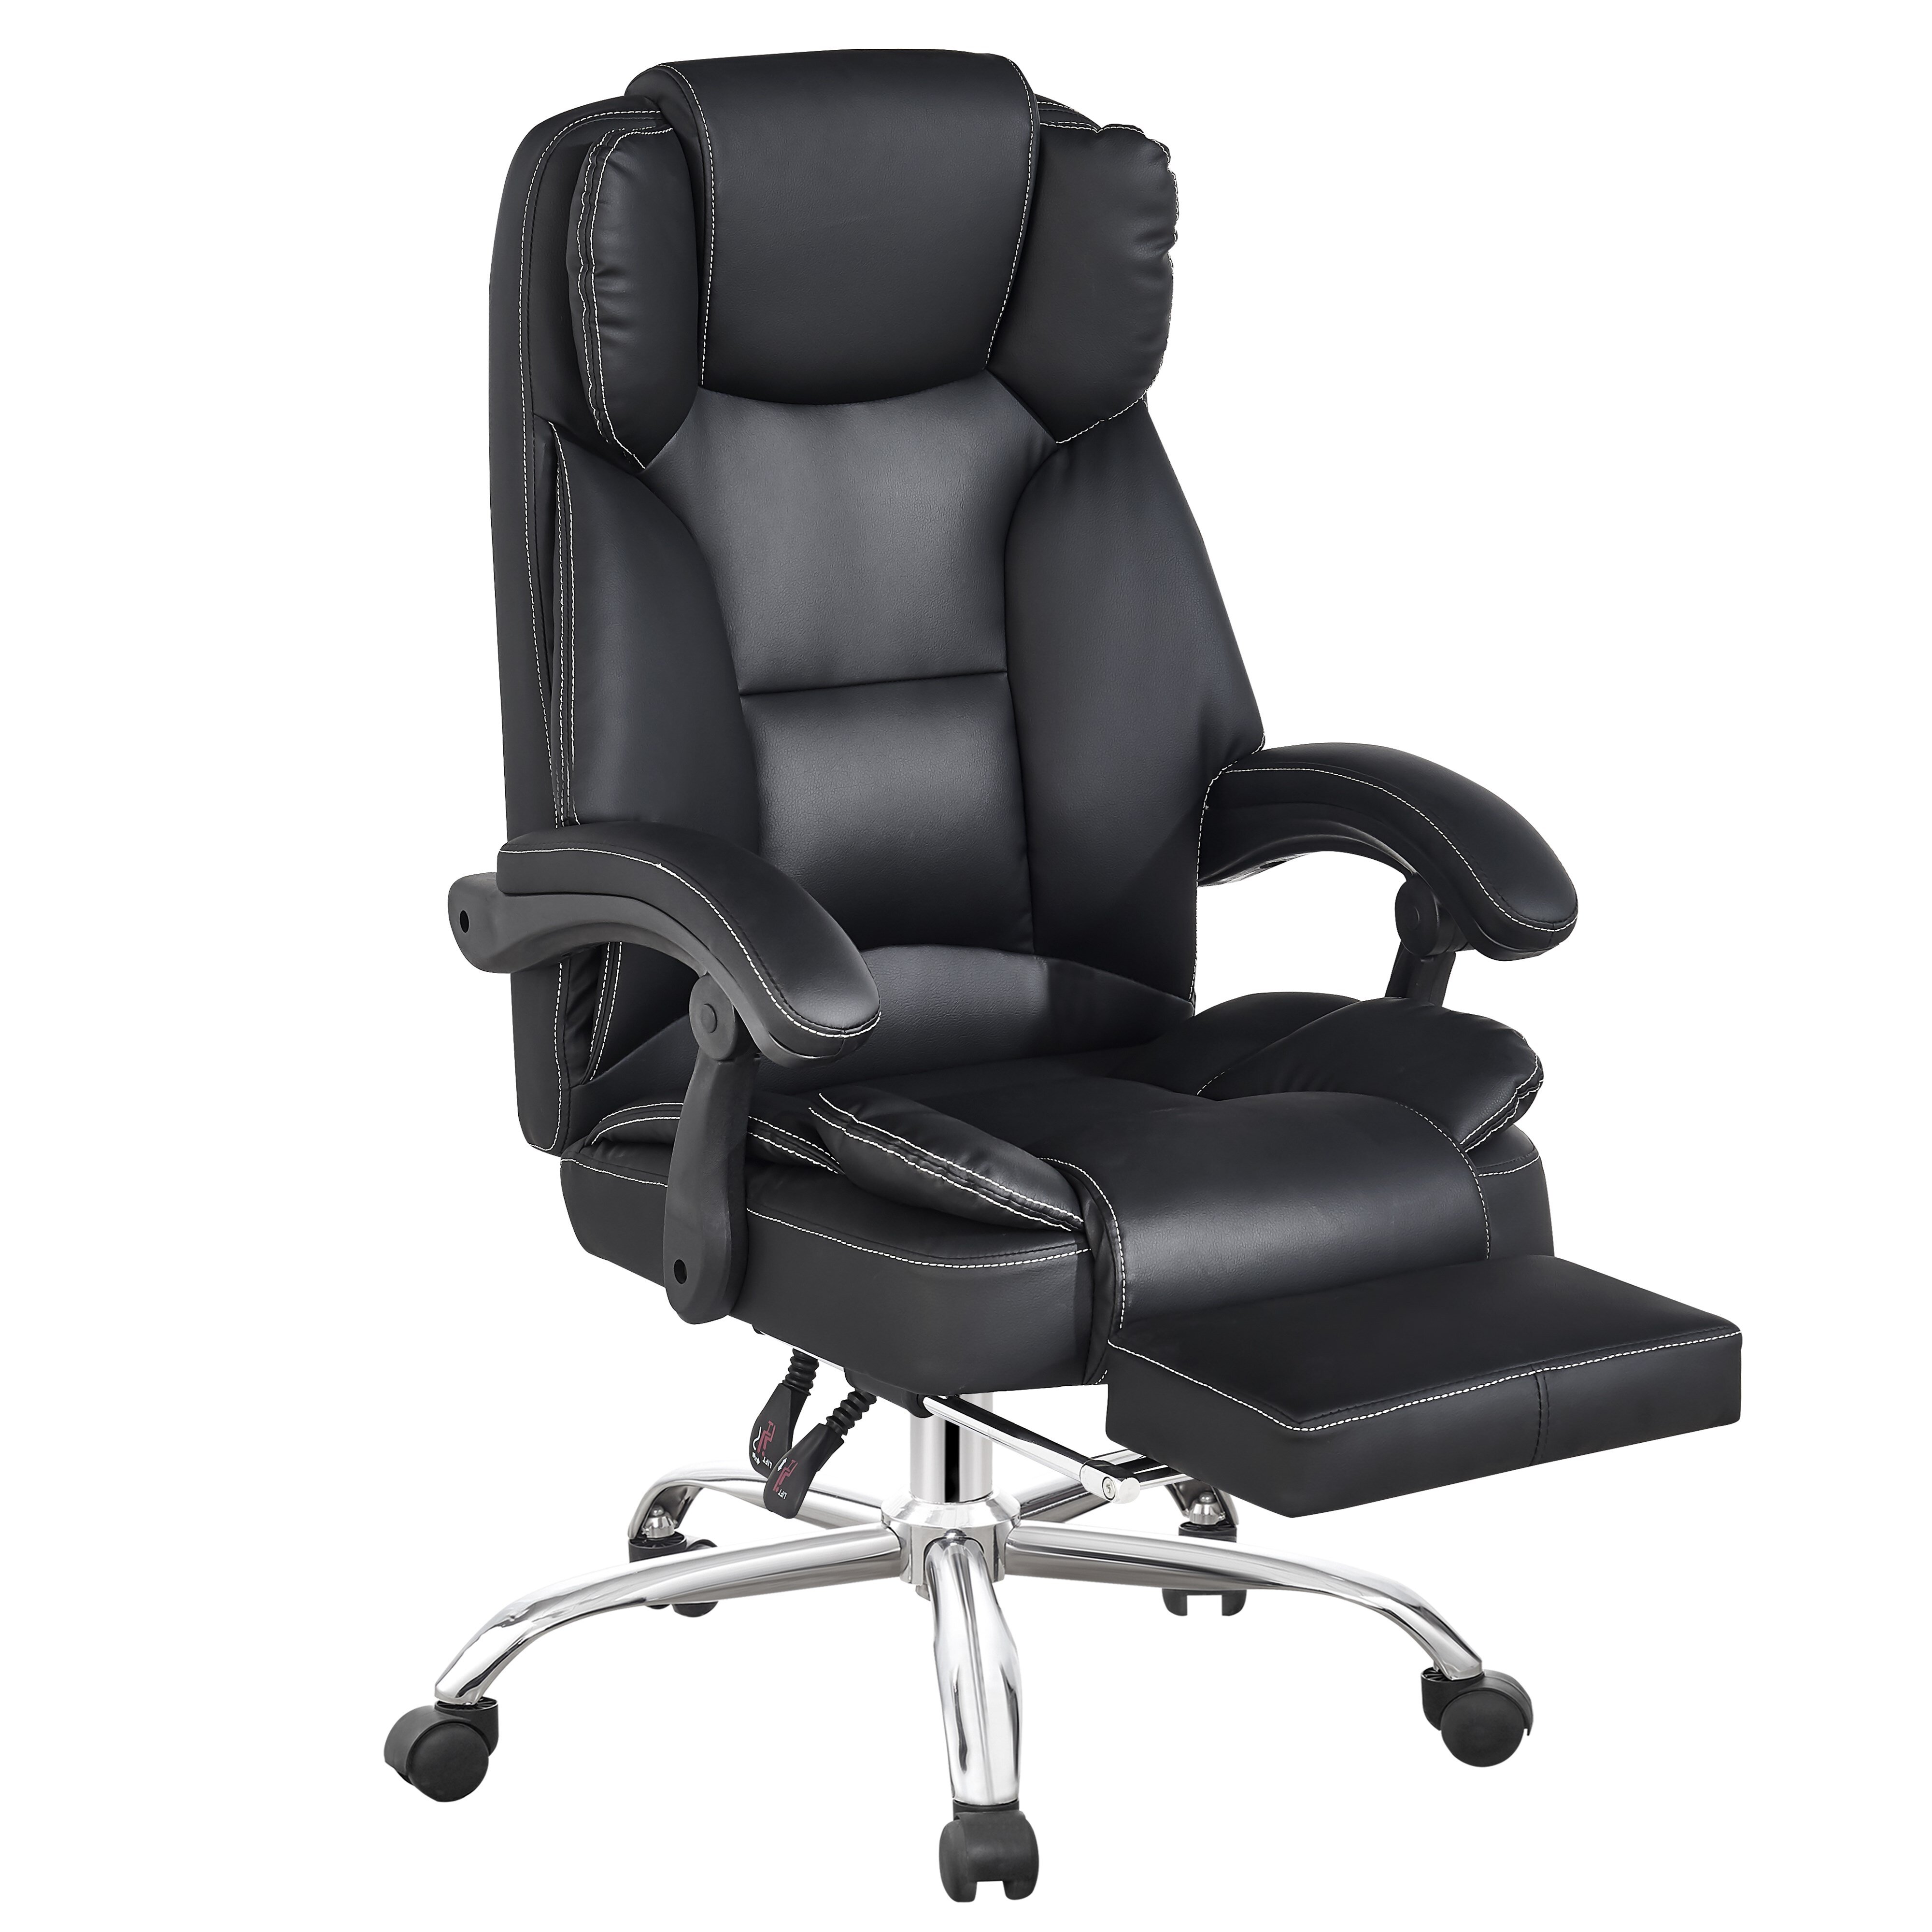 heavy duty ergonomic executive office chair with foot rest fully reclining  office chair with wheels rolling swivel lift chair recliner adjustable